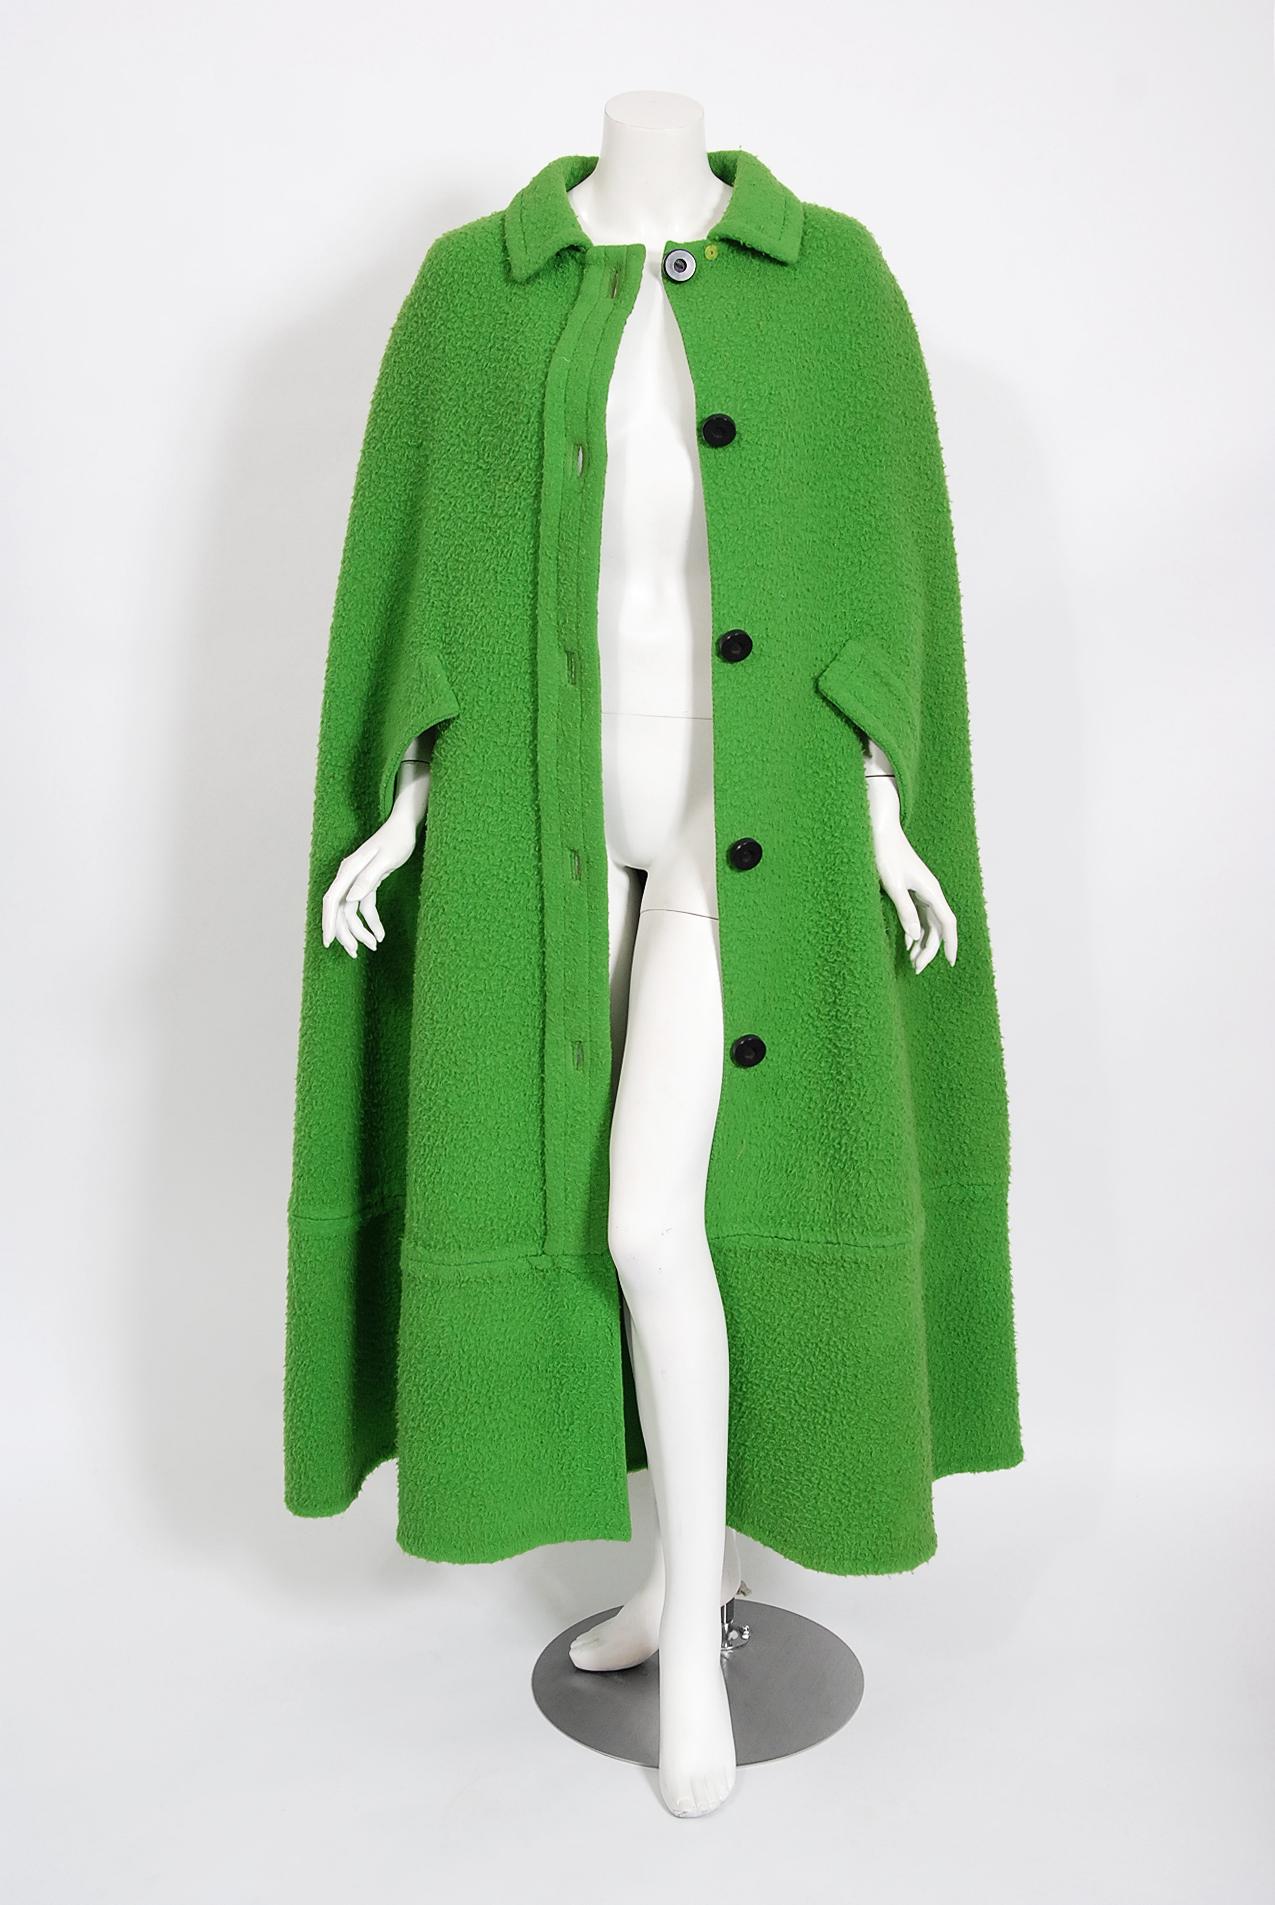 The House of Dior has been an enduring icon of Haute Couture. When the talented Marc Bohan took over as head designer in 1960, he continued the Dior tradition of elegant design. This beautiful full-length cloak cape, dating back to 1966, was